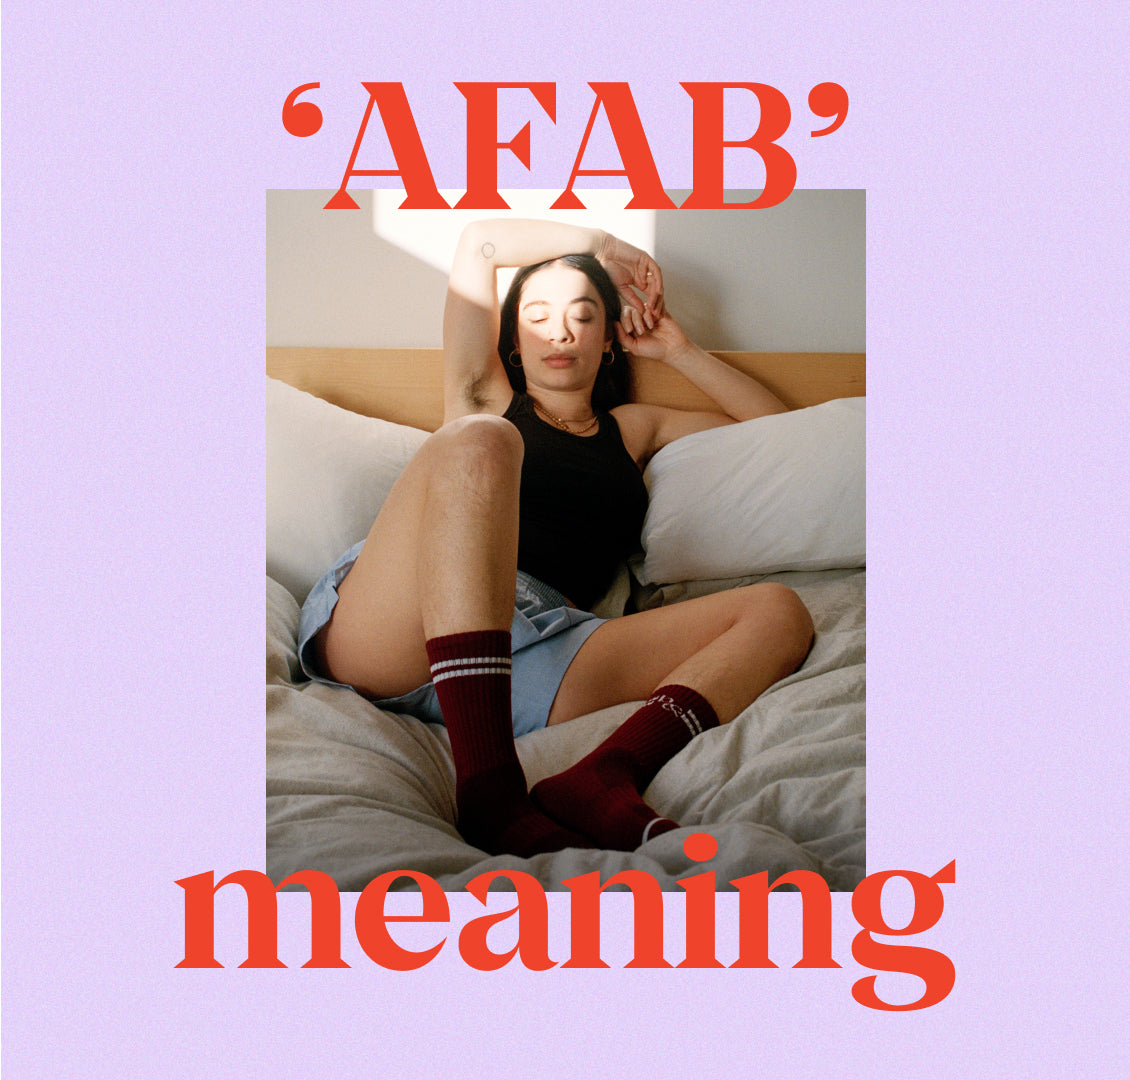 AFAB meaning